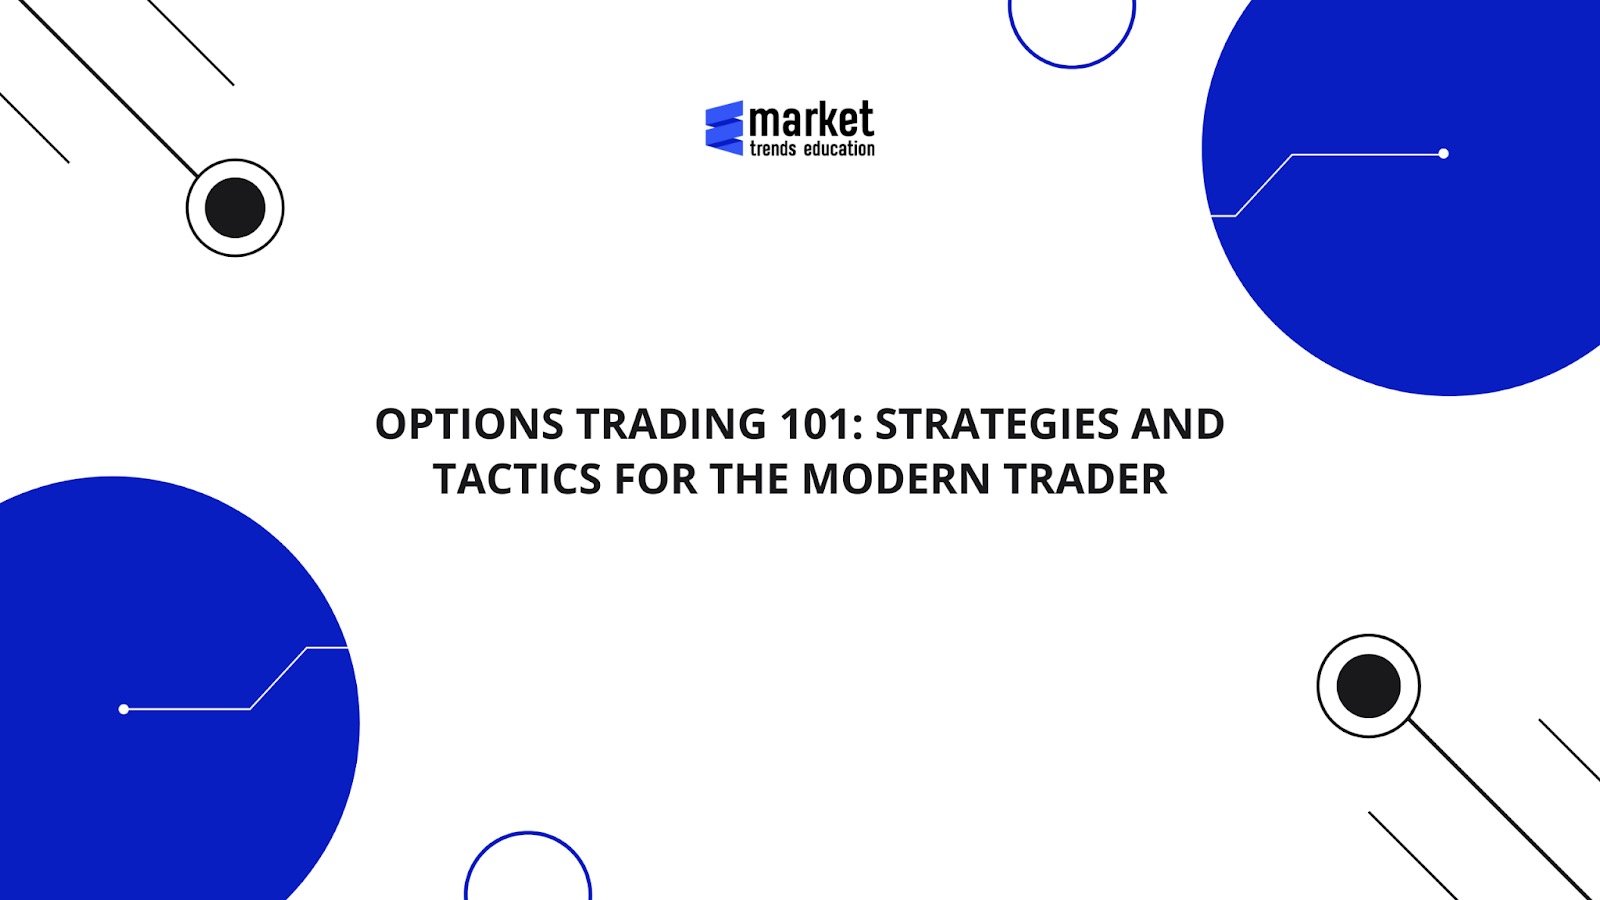 Options Trading 101: Strategies and Tactics for the Modern Trader